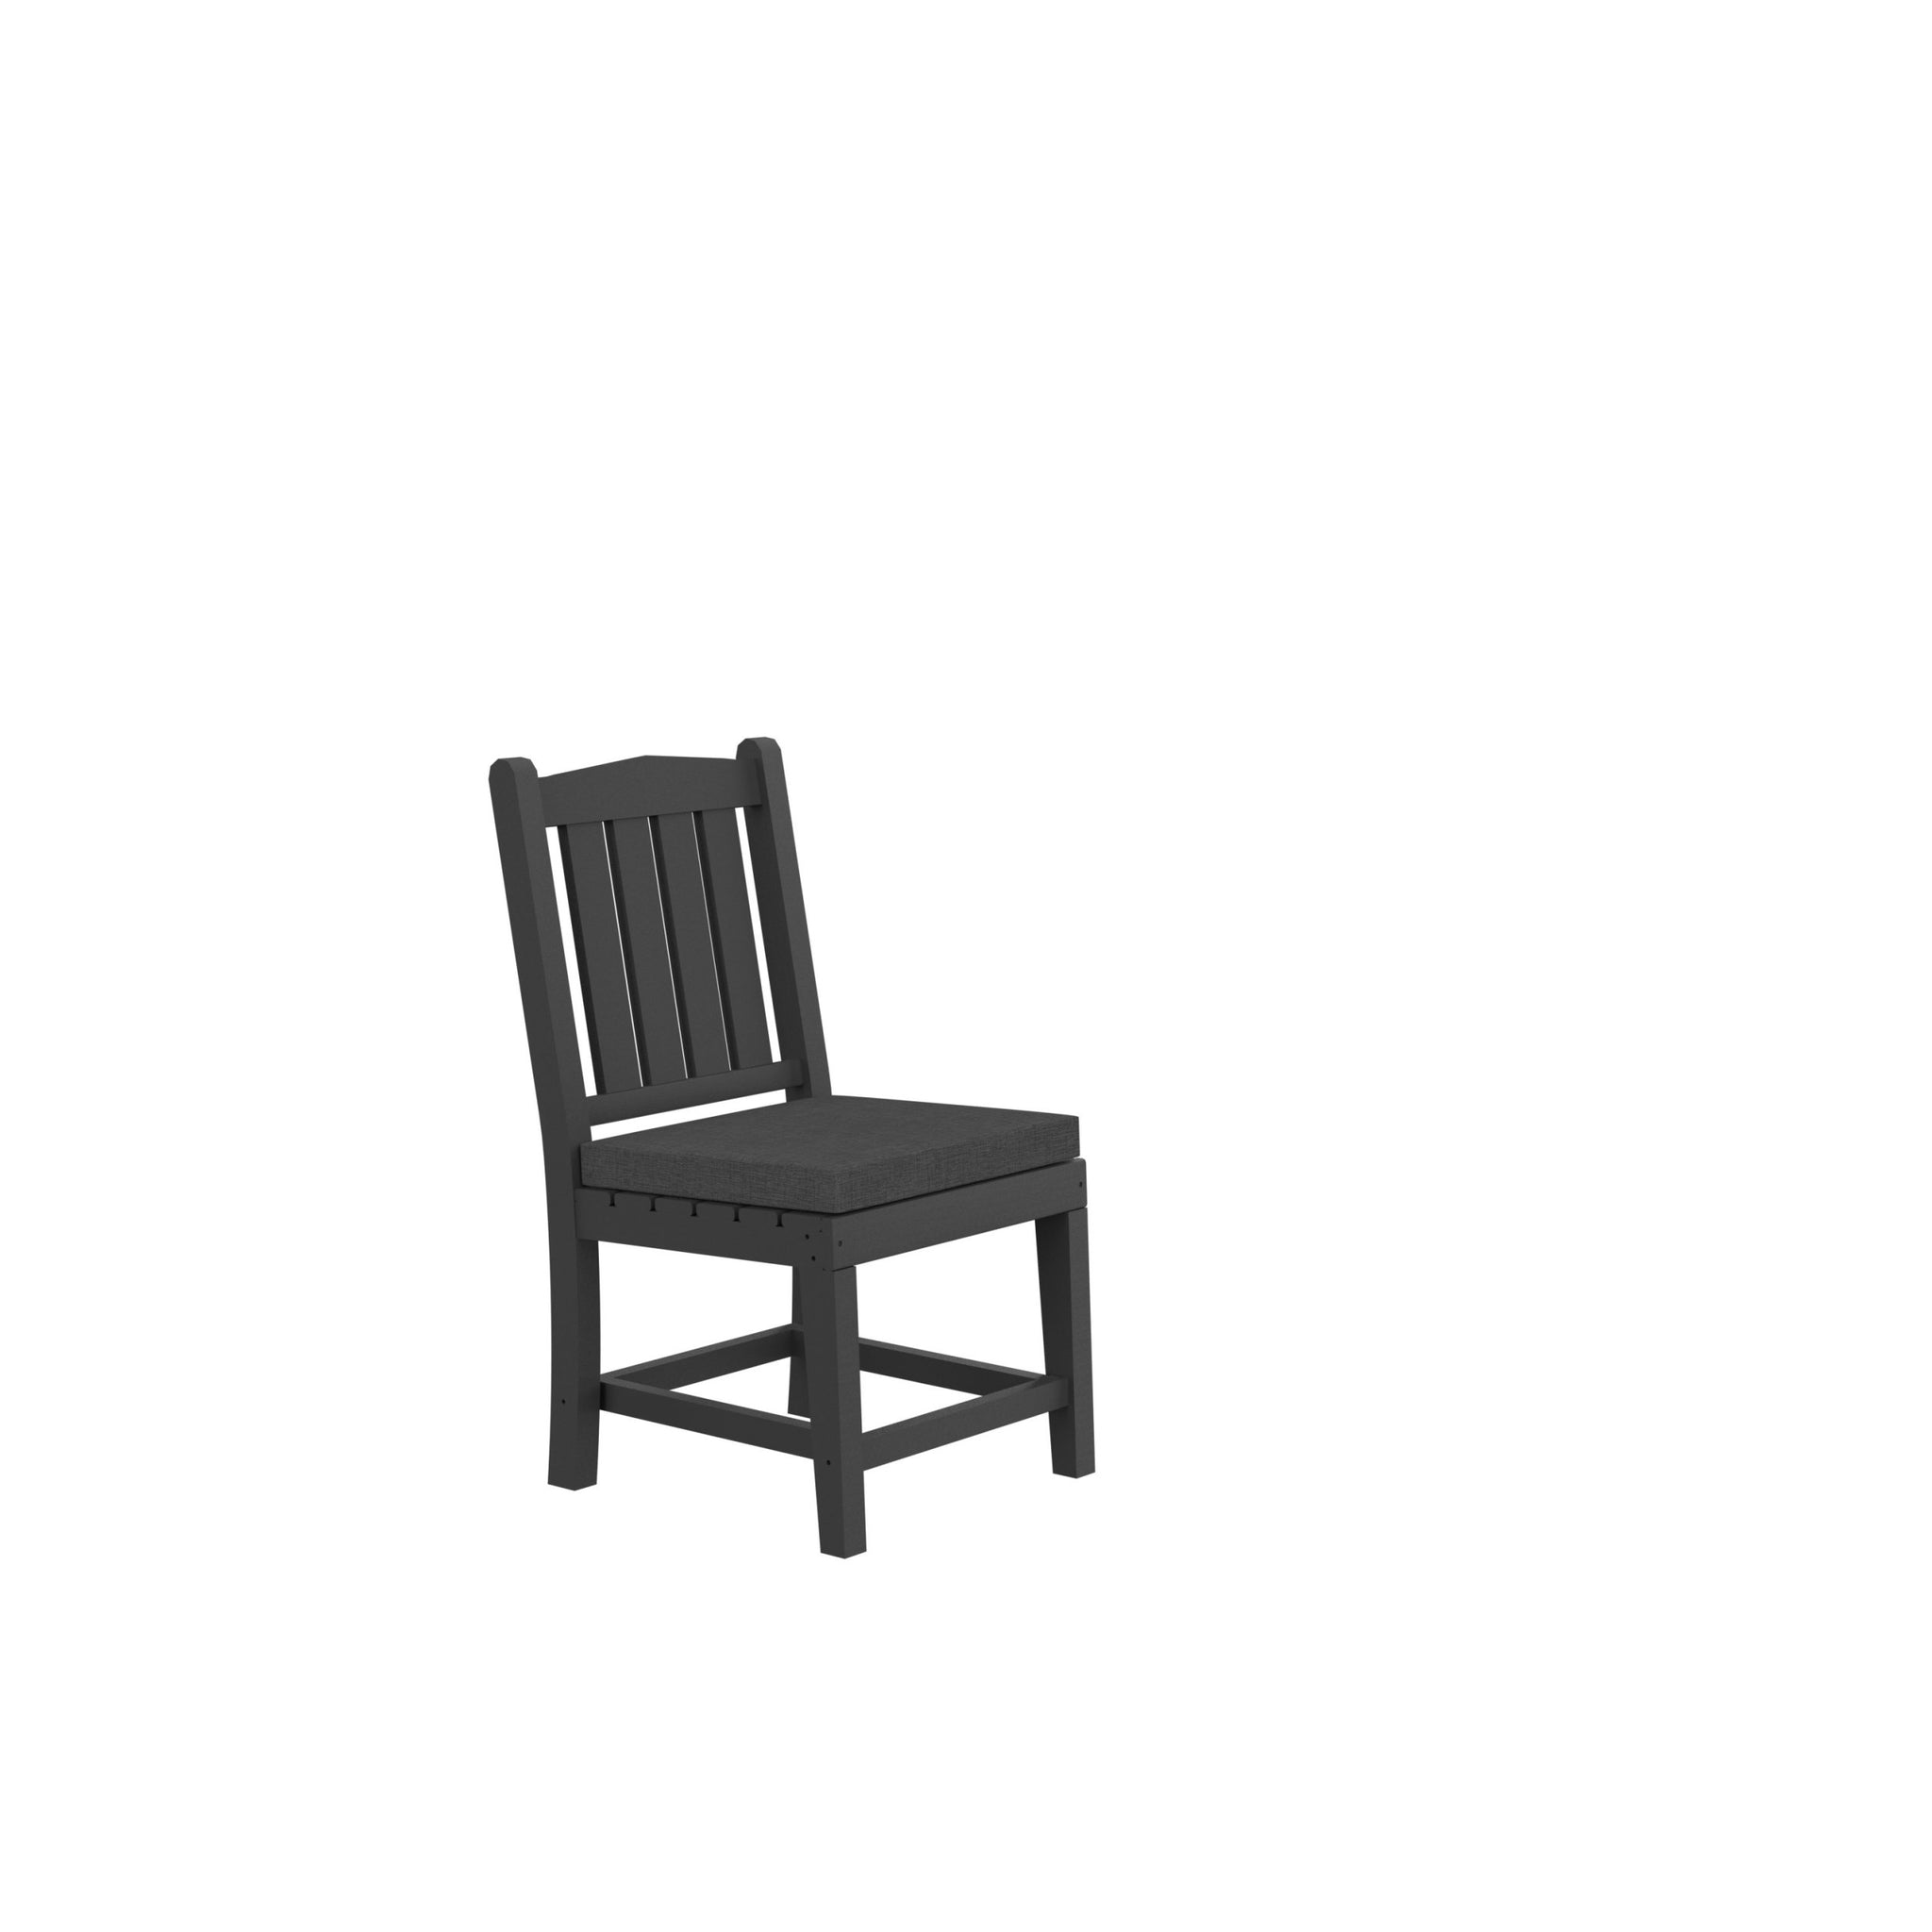 HDPE Dining Chair, Gray, With Cushion, No Armrest, Set gray-hdpe